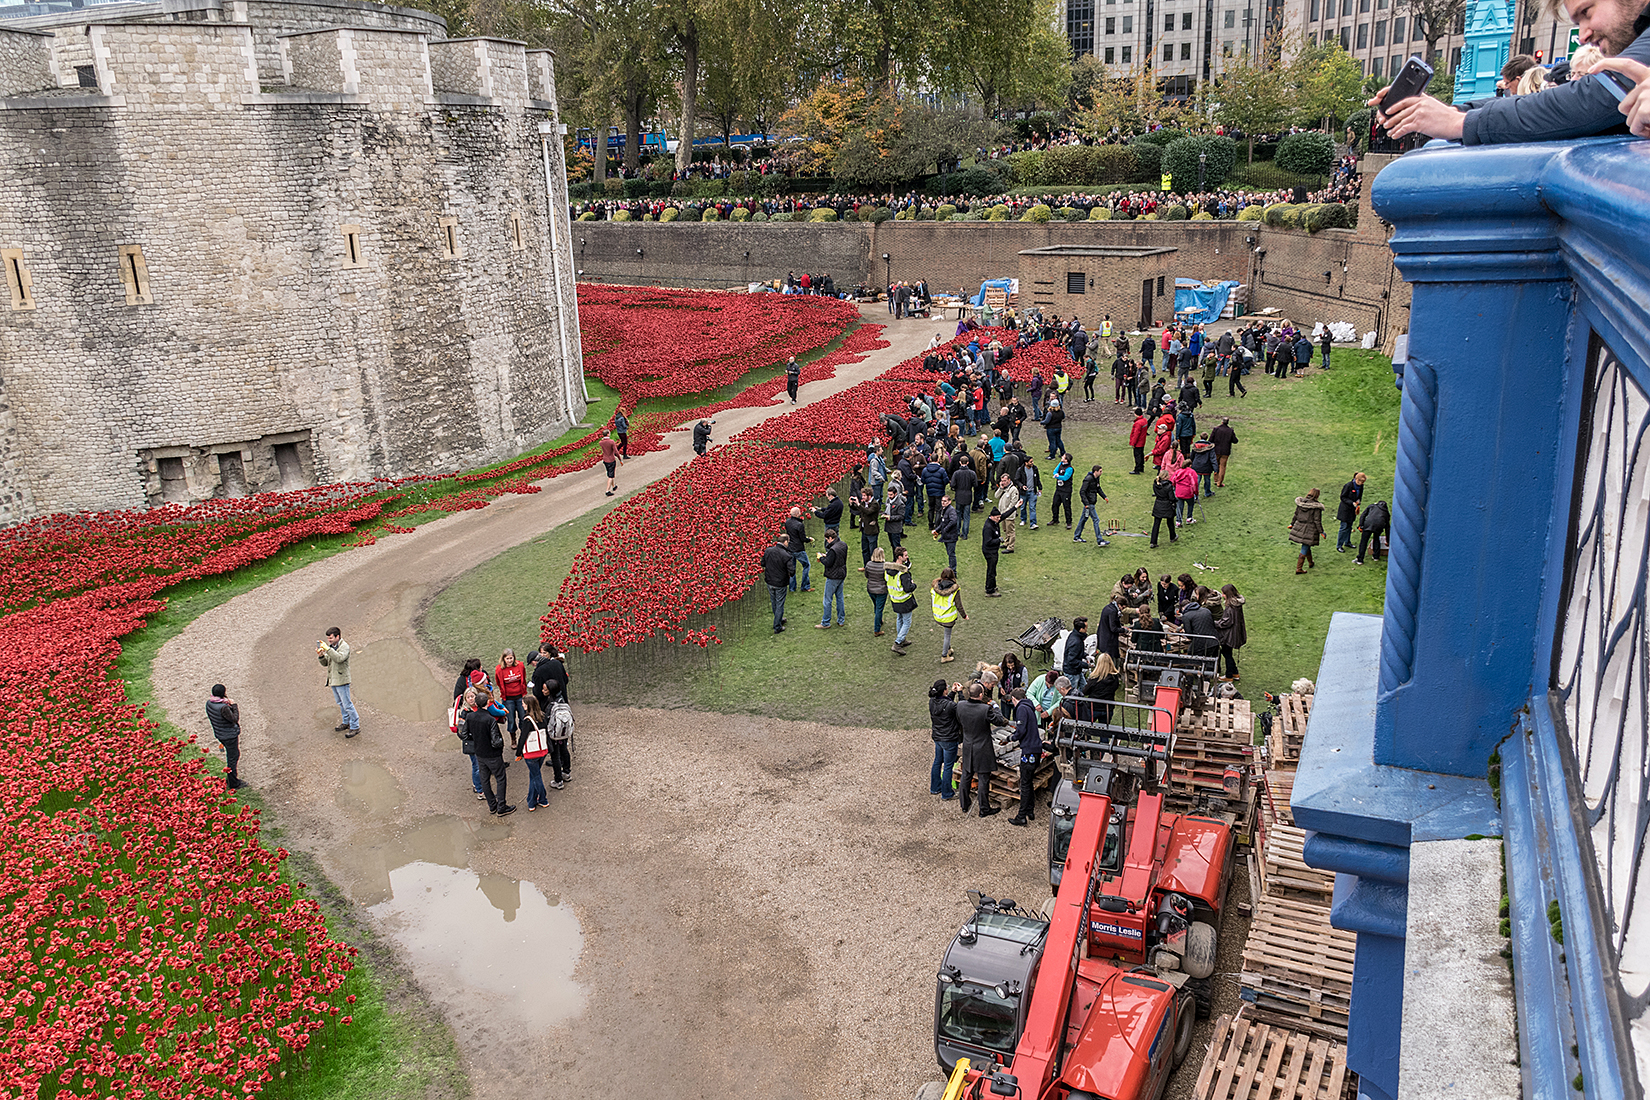 Final poppies being assembled and placed in the installation